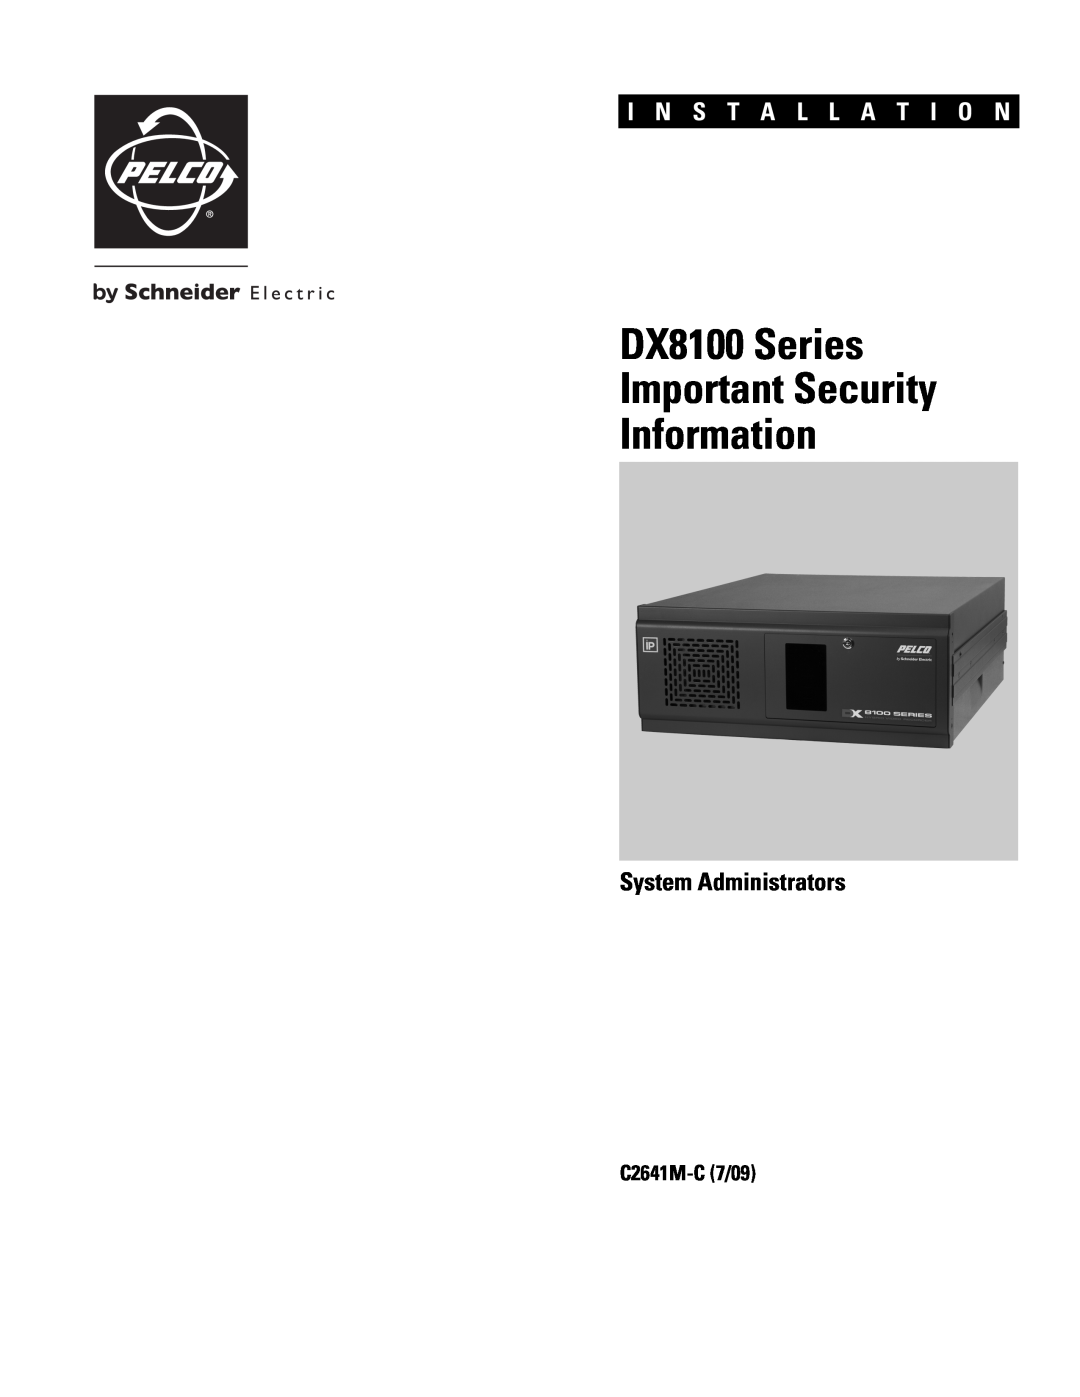 Pelco dx8100 installation instructions DX8100 Series McAfee VirusScan Plus, with SiteAdvisor Installation Instructions 